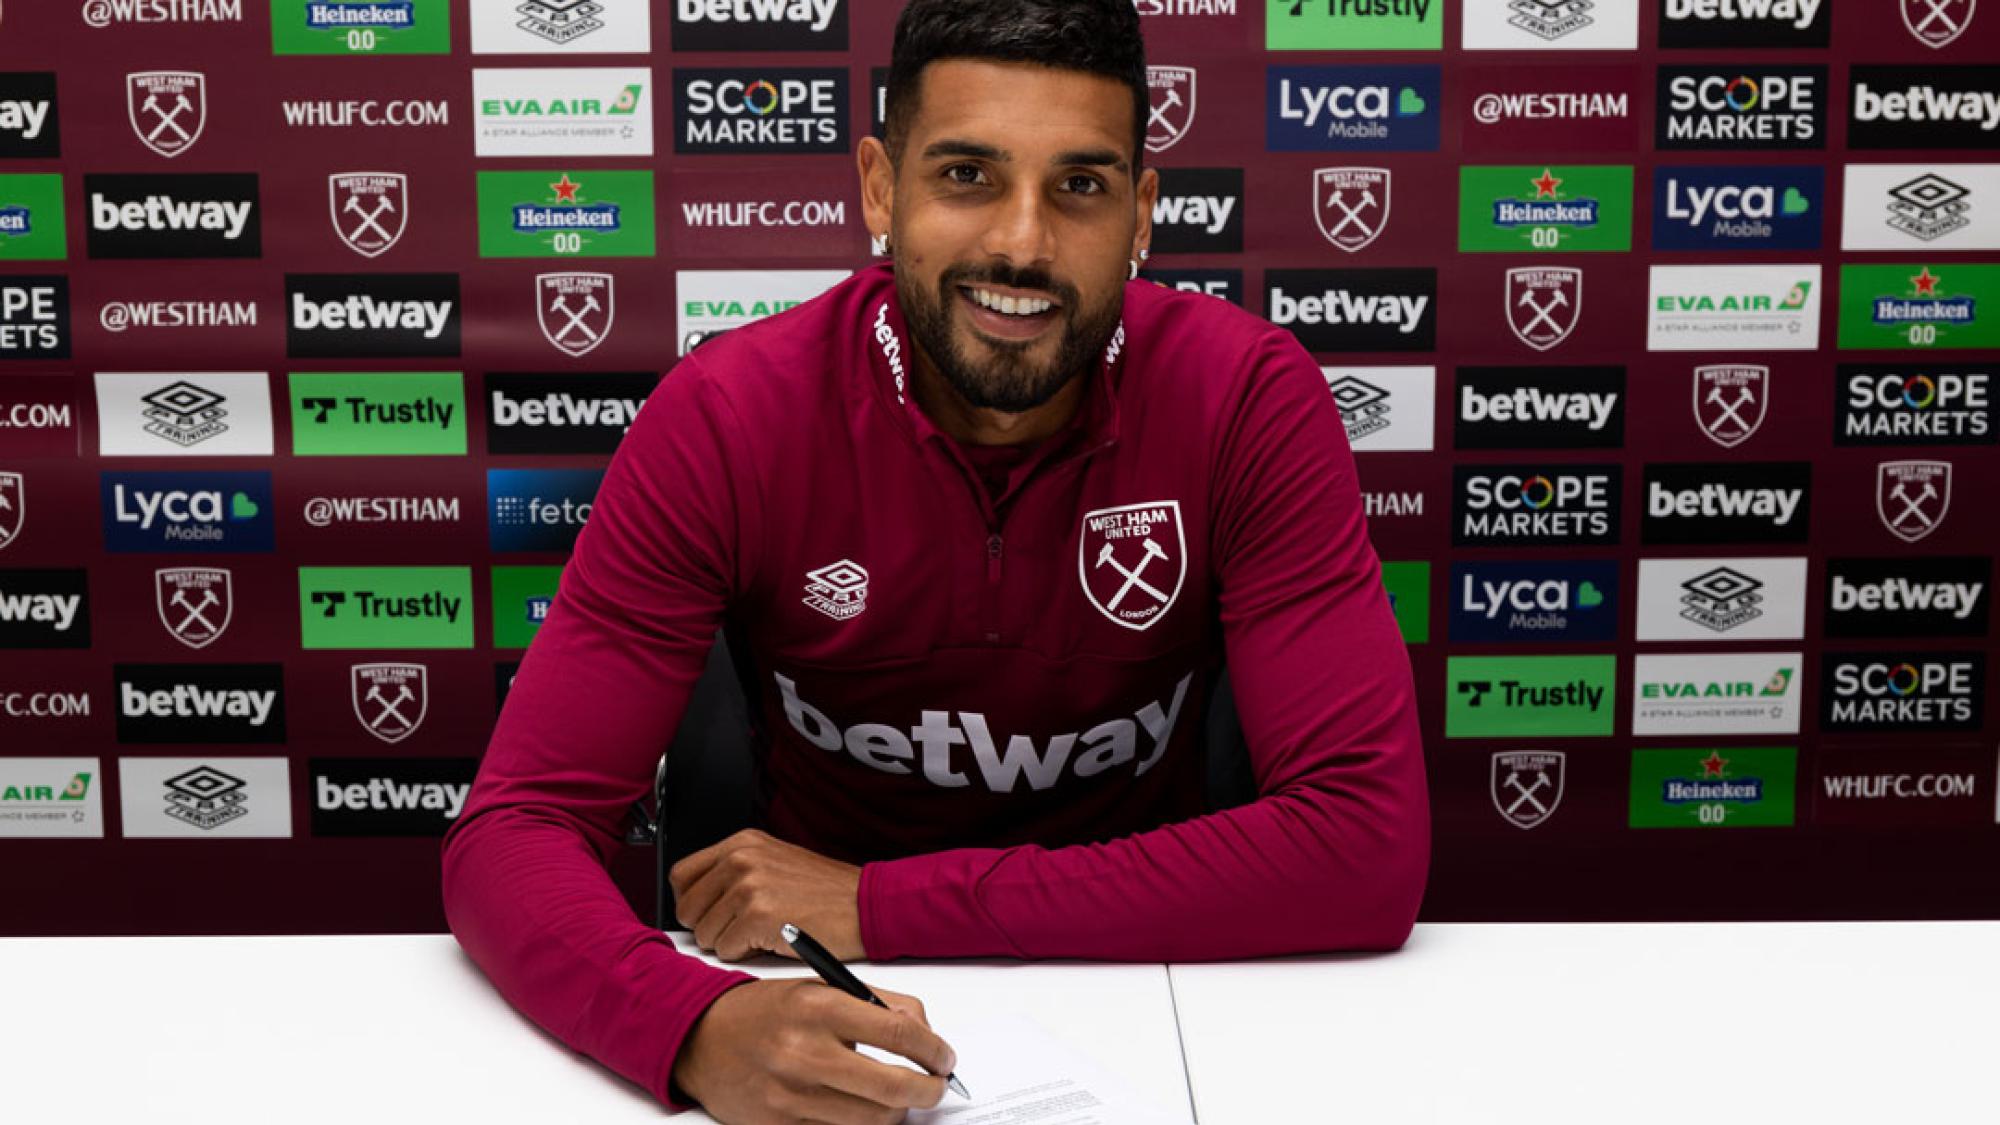 Aim is to try and win every game to make a good season, asserts Emerson Palmieri